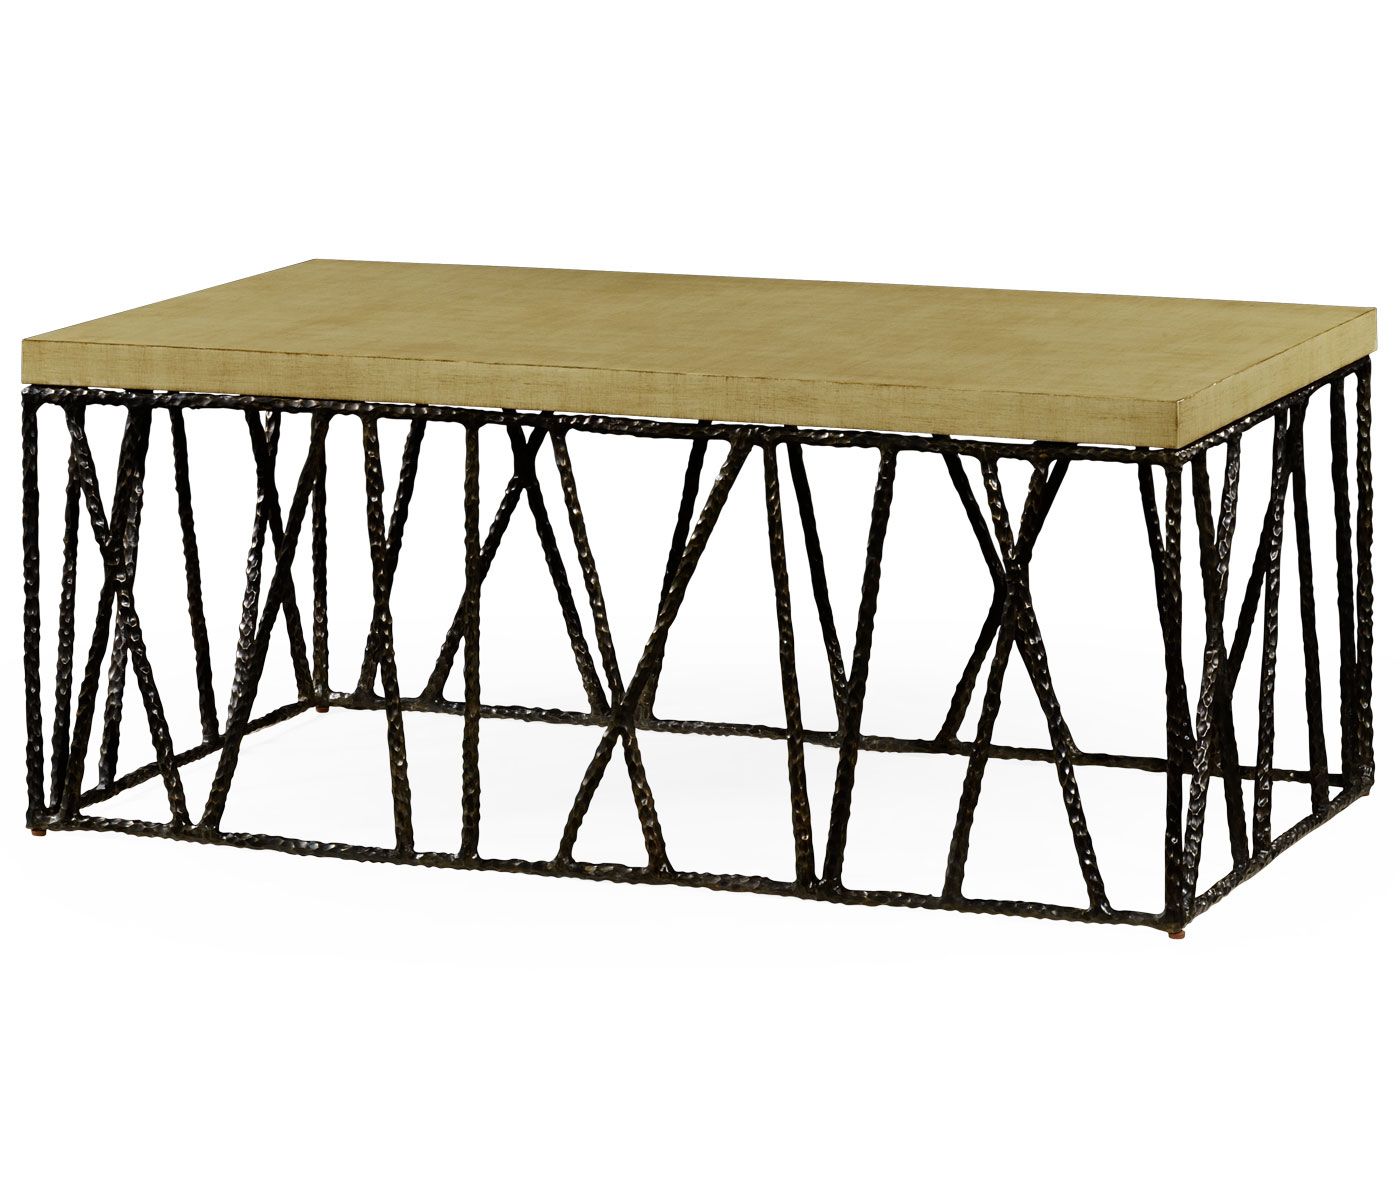 Hammered Antique Black Brass Coffee Table With Celadon Top Throughout 2019 Hammered Antique Brass Modern Cocktail Tables (Gallery 5 of 20)